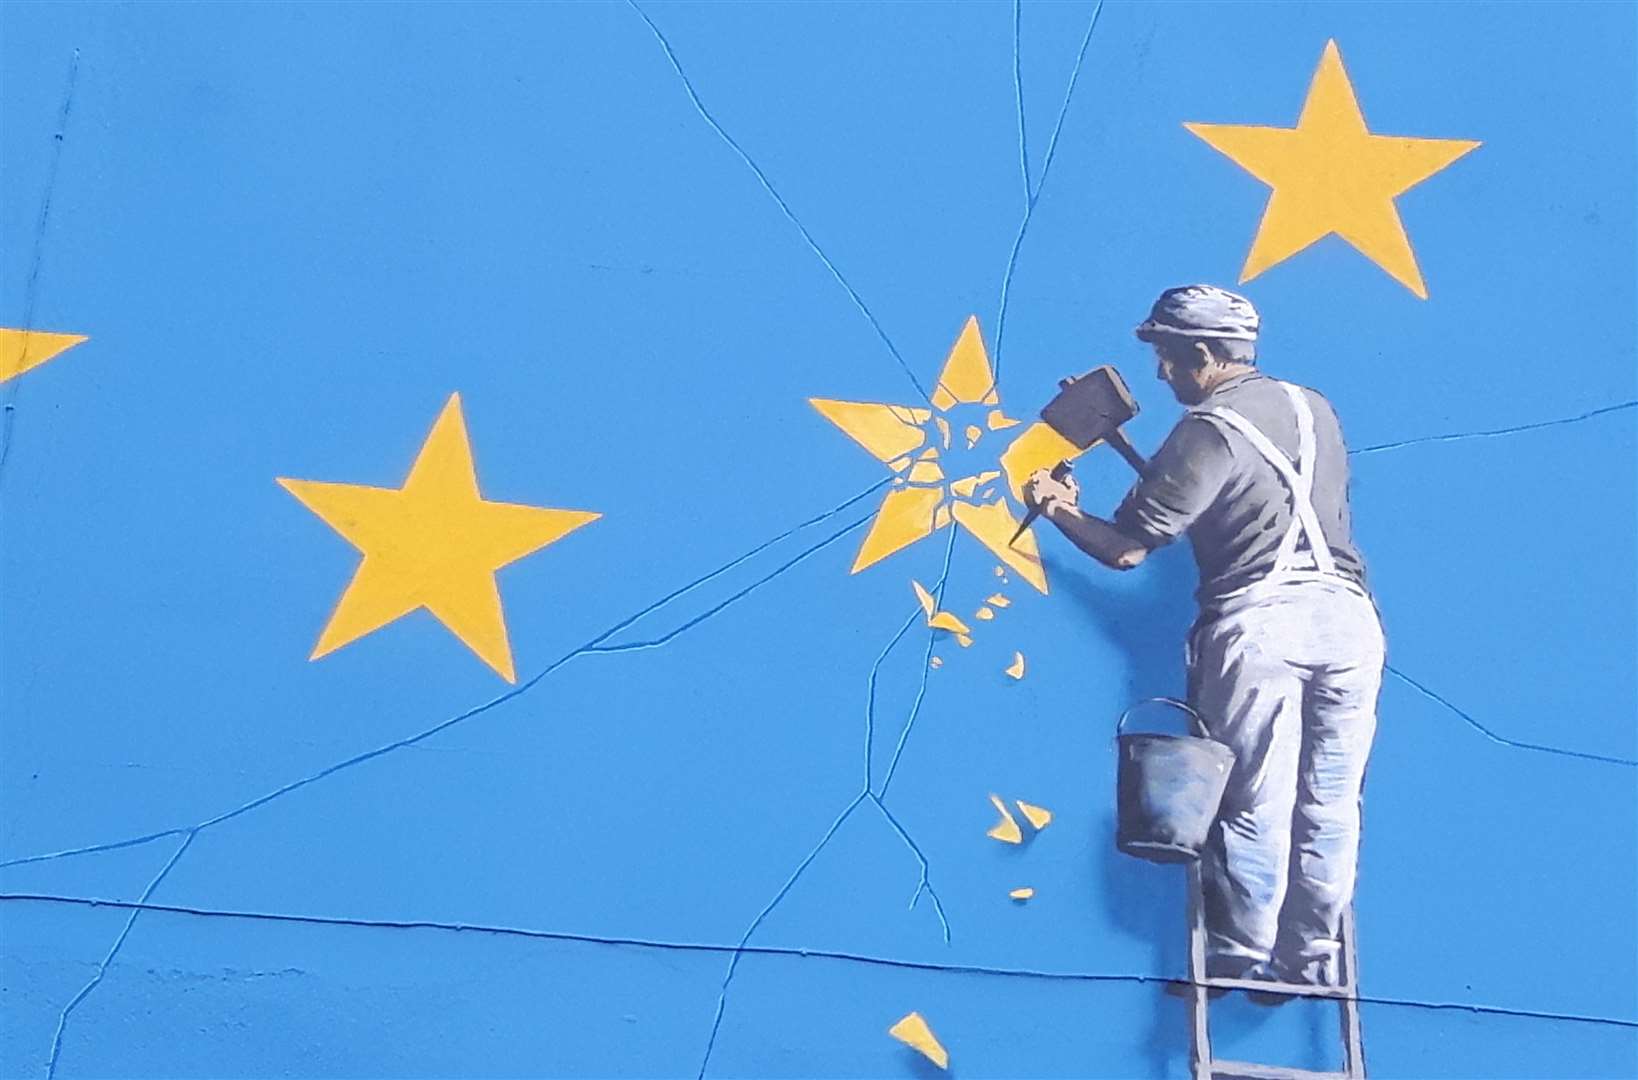 The Brexit-themed mural appeared in May 2017